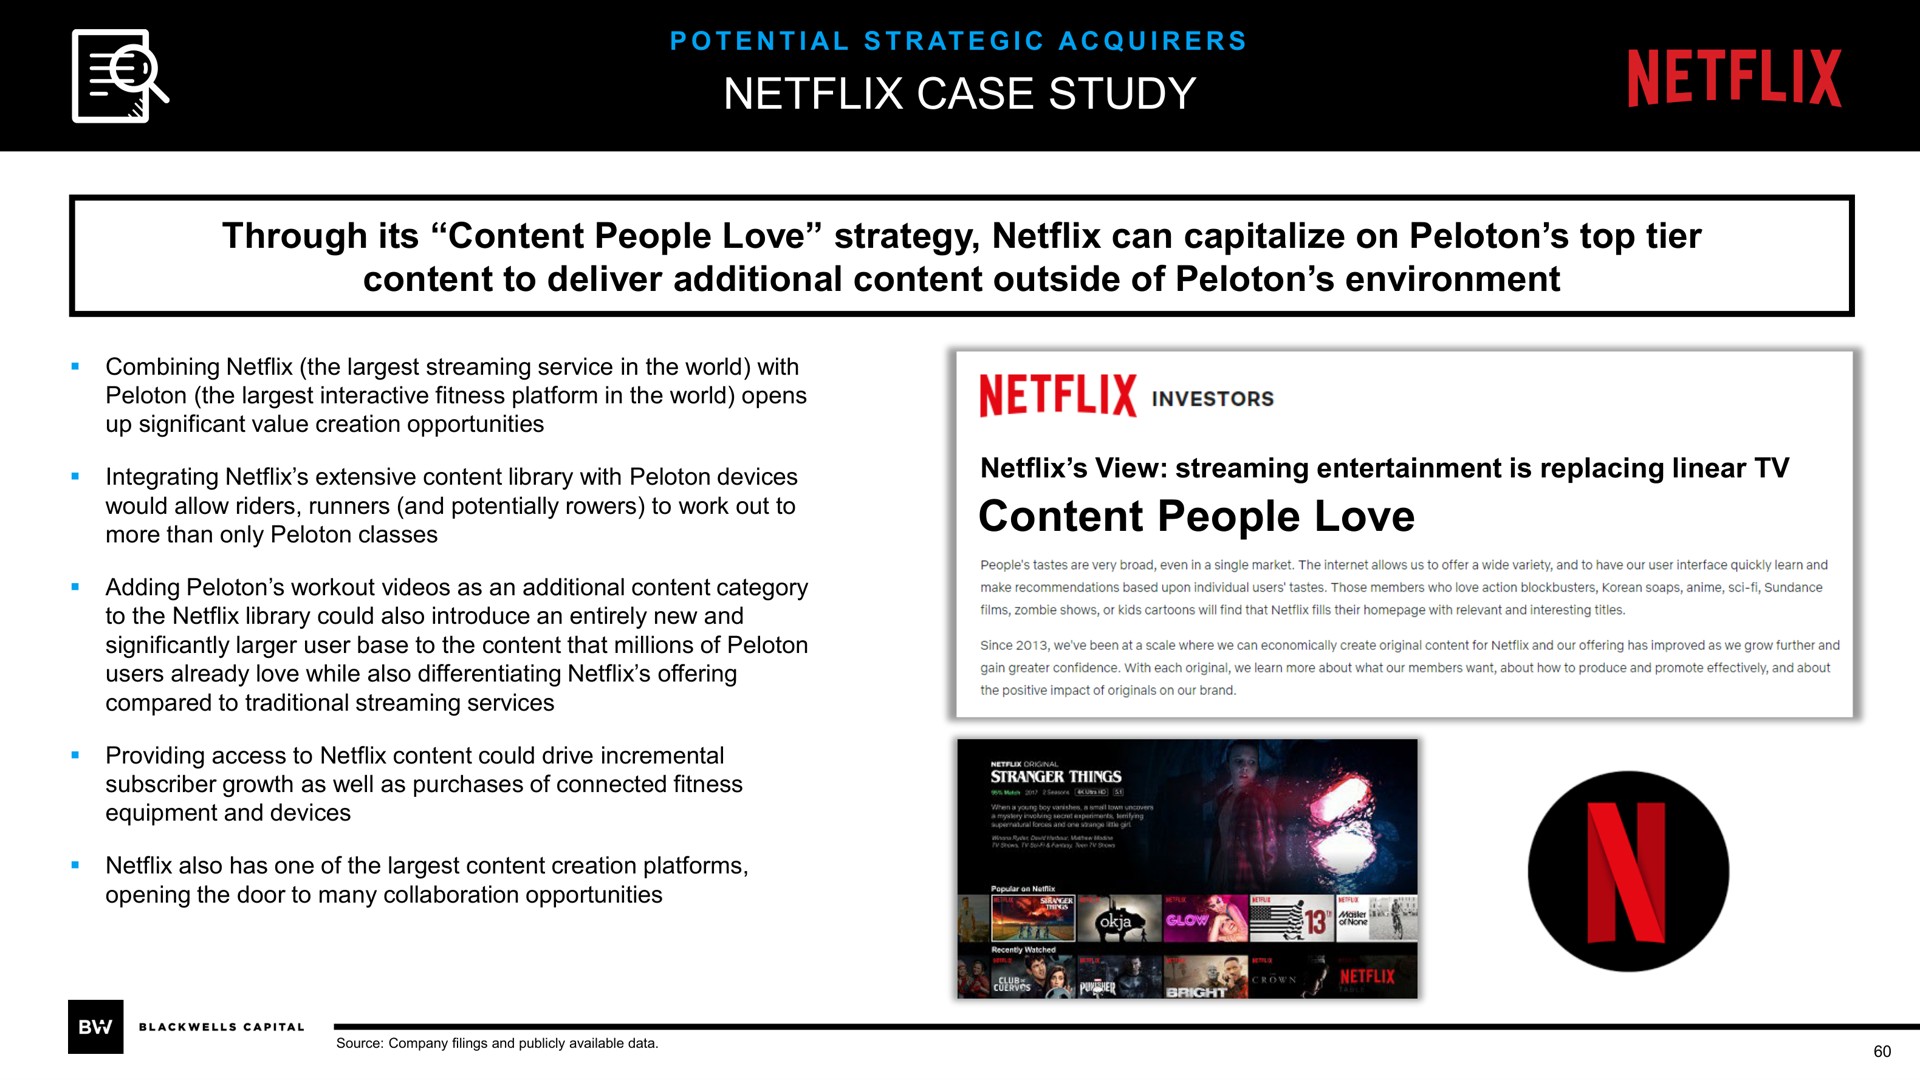 case study through its content people love strategy can capitalize on peloton top tier content to deliver additional content outside of peloton environment content people love | Blackwells Capital